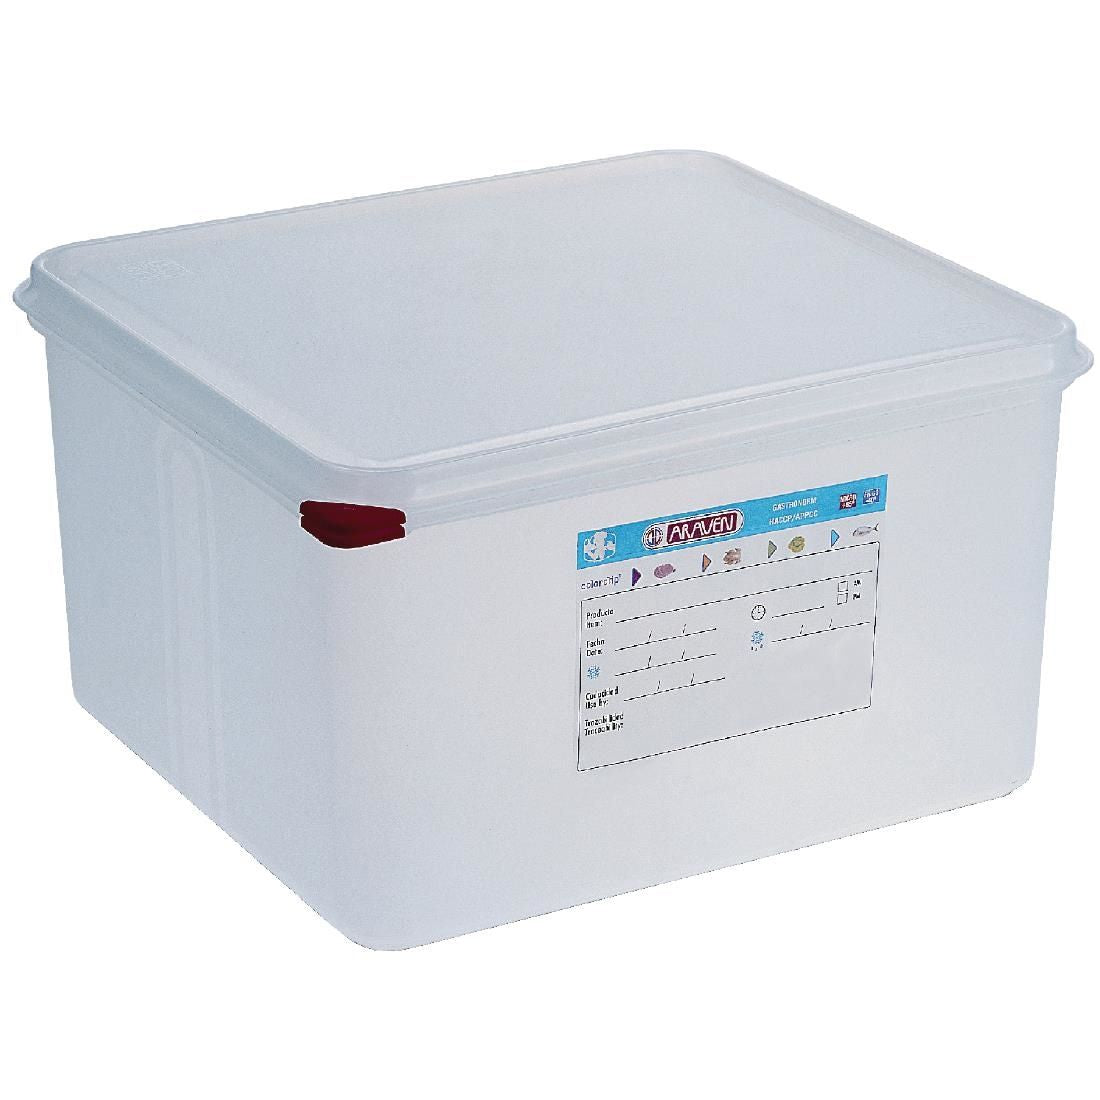 DL983 Araven Polypropylene 2/3 Gastronorm Food Storage Container 19Ltr (Pack of 4) JD Catering Equipment Solutions Ltd